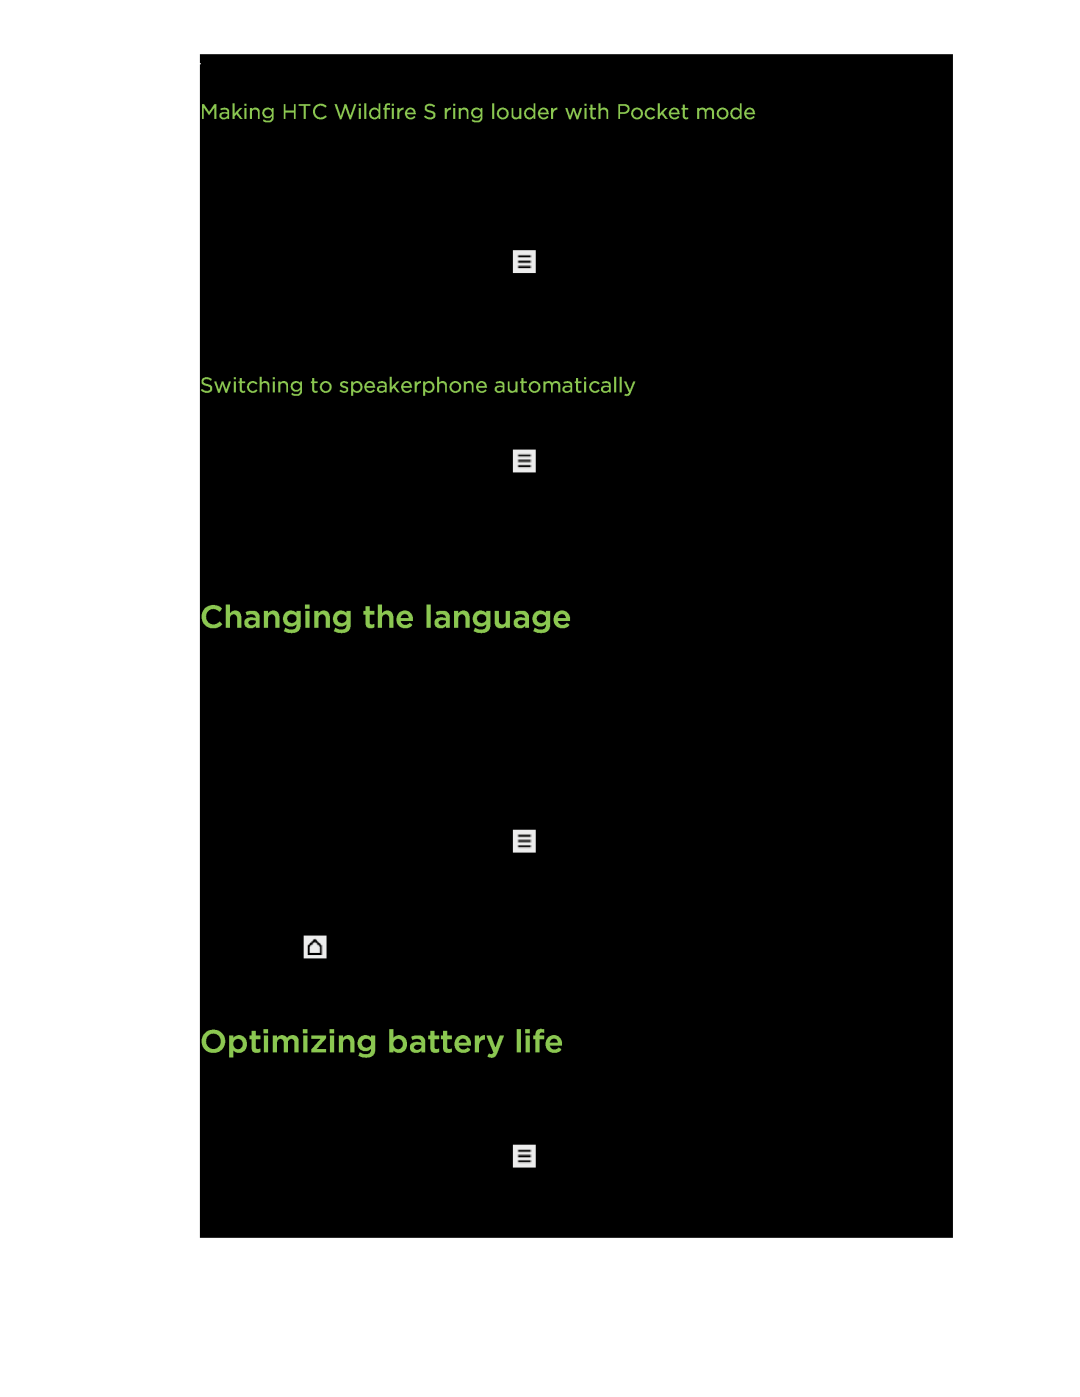 HTC manual Changing the language, Optimizing battery life, Making HTC Wildfire S ring louder with Pocket mode 